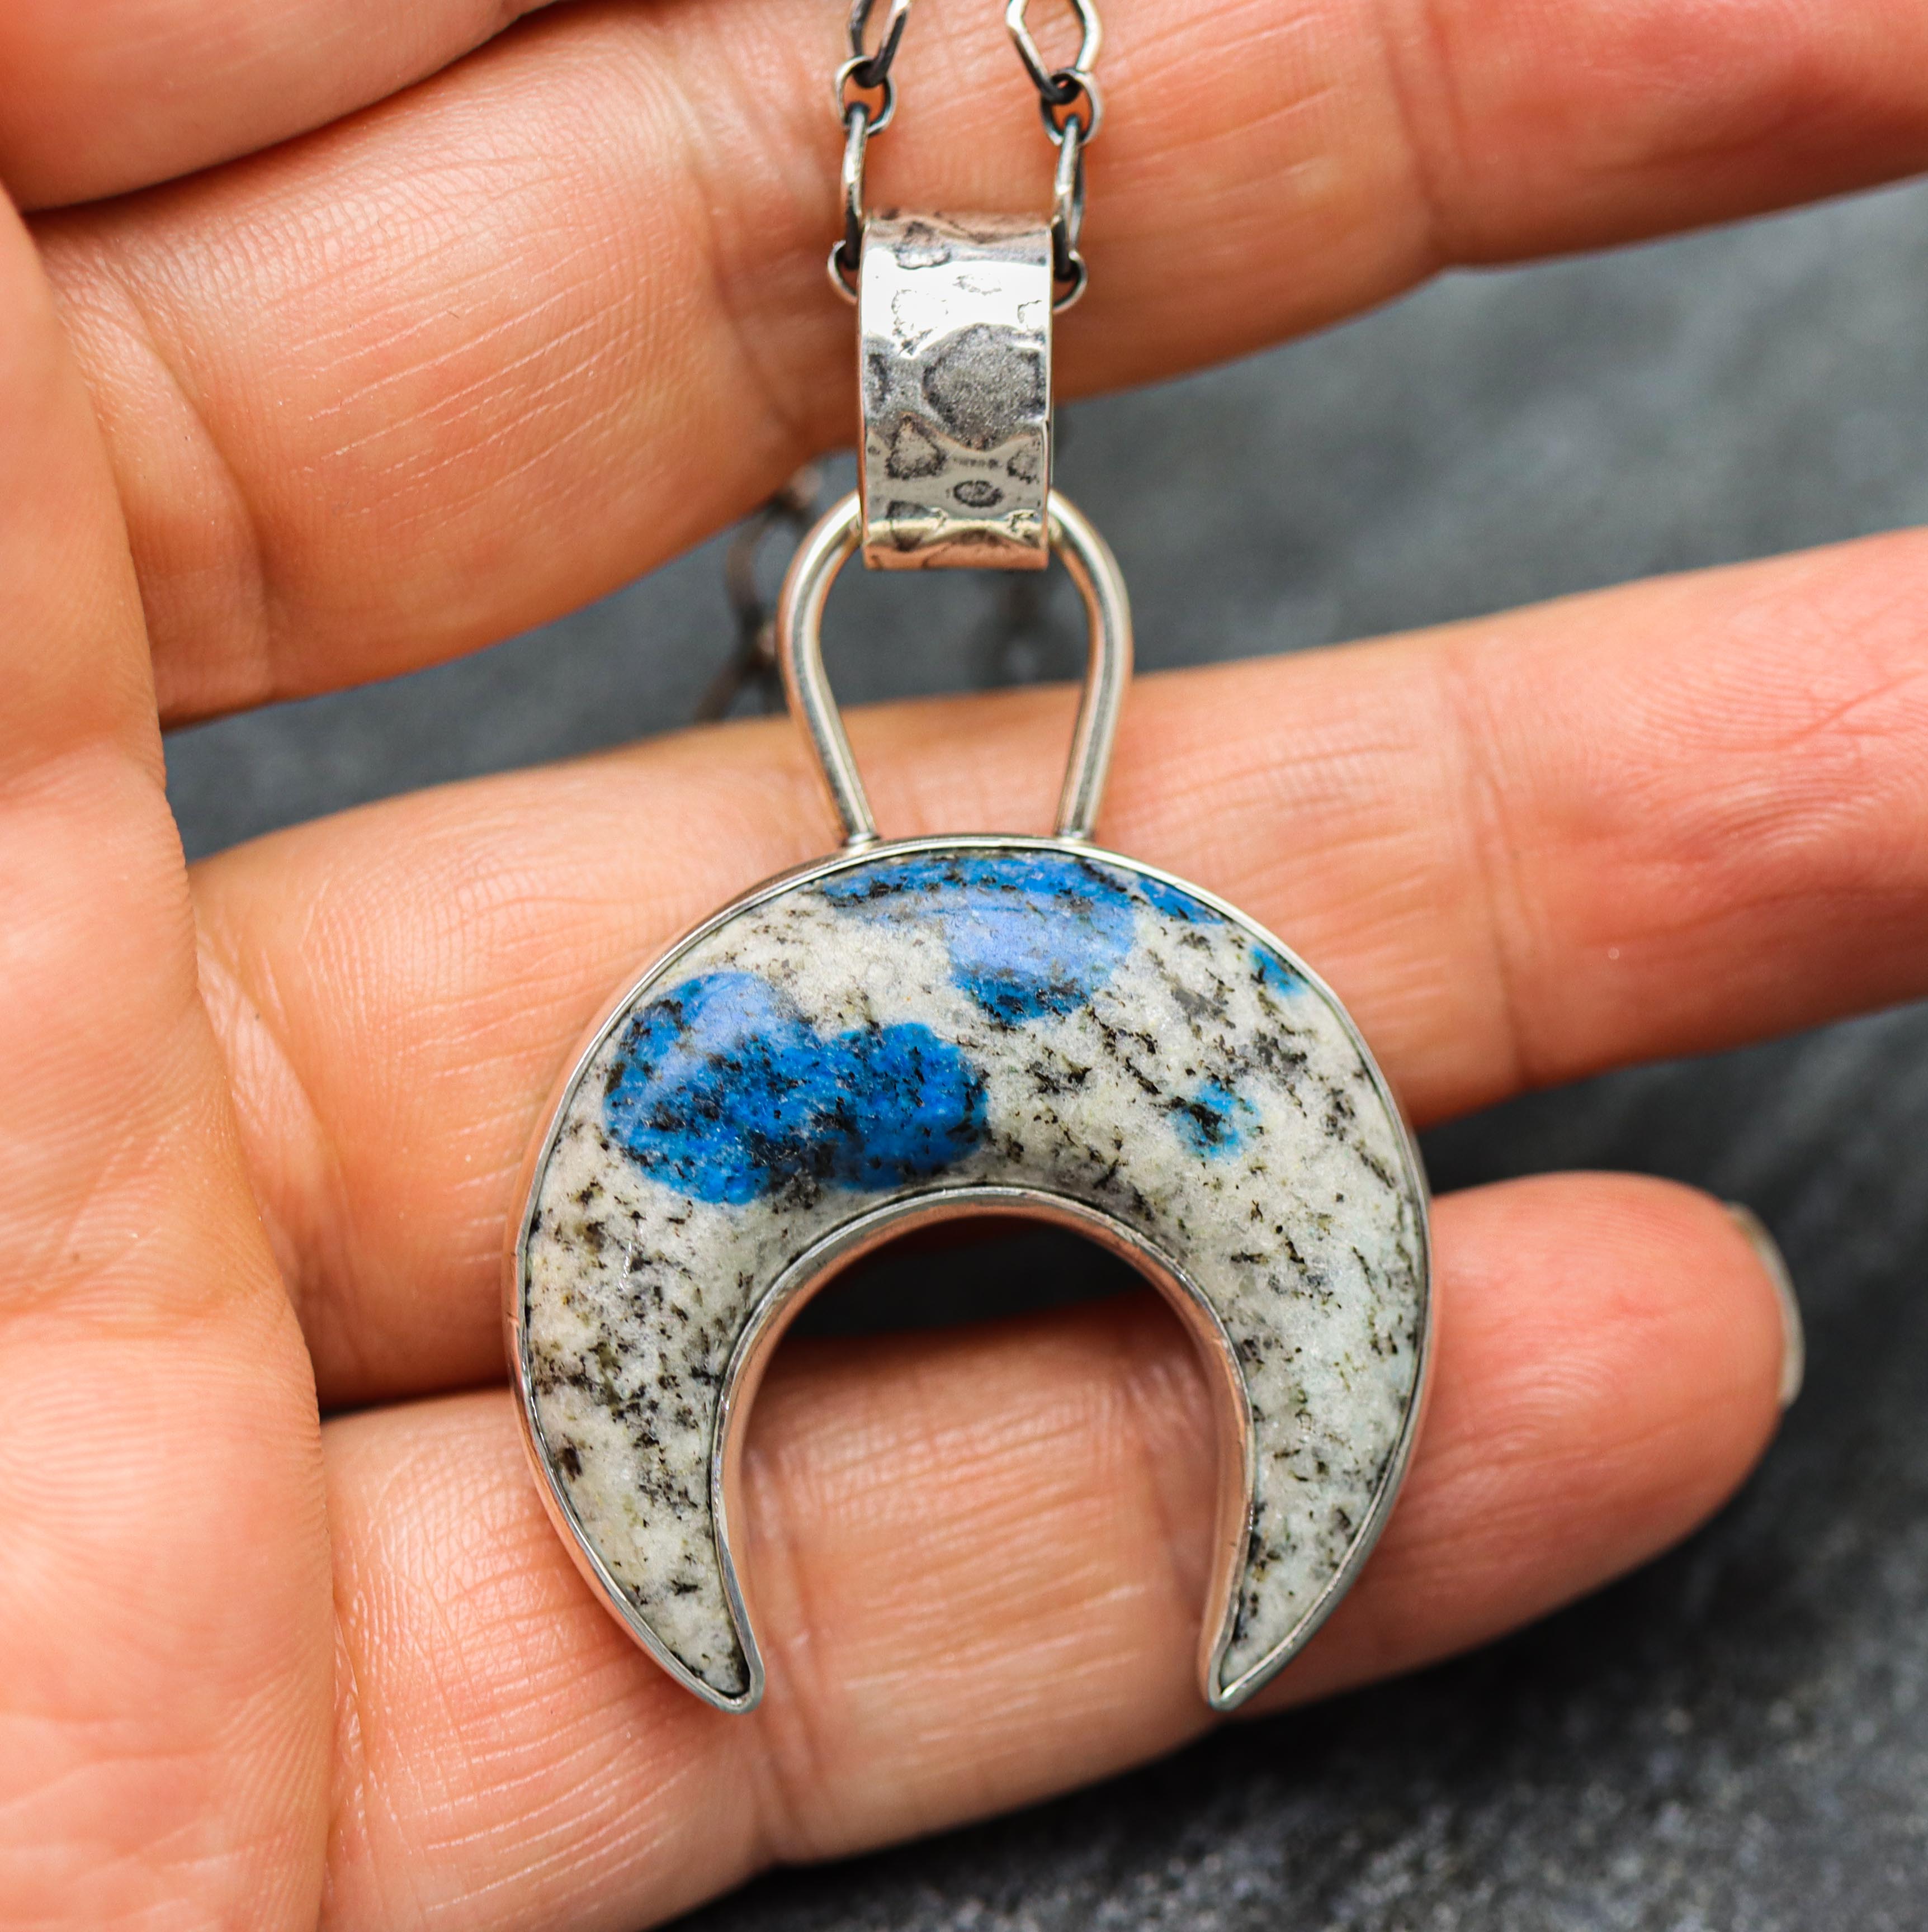 Crescent Moon Pendant Necklace Sterling Silver K2 Granite with Blue Azurite